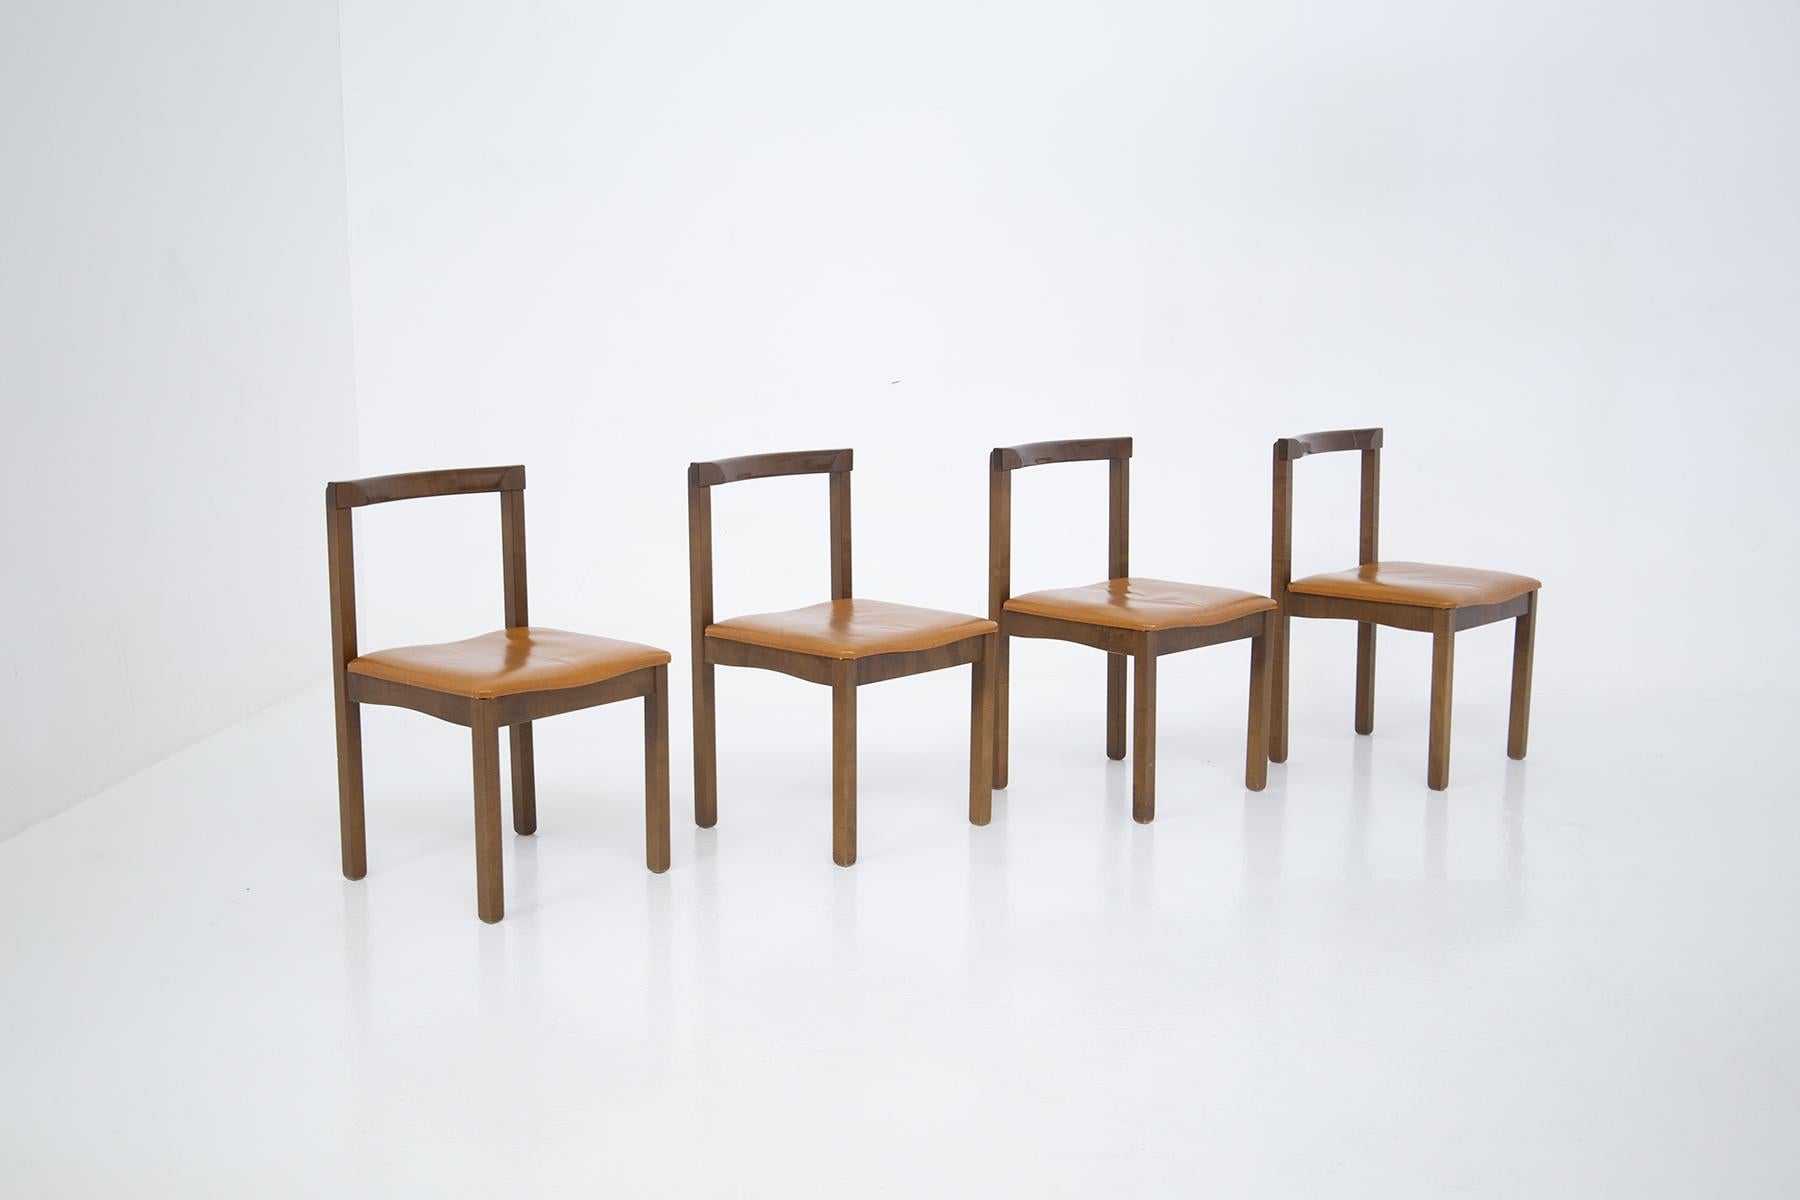 Set of four chairs by Vittorio Introini for manifattura Sormani 1950s. The chairs are made of wood for the frame and have a polished finish. The seat is upholstered in original brown leather of the time. The leather has no cracks or damage, only